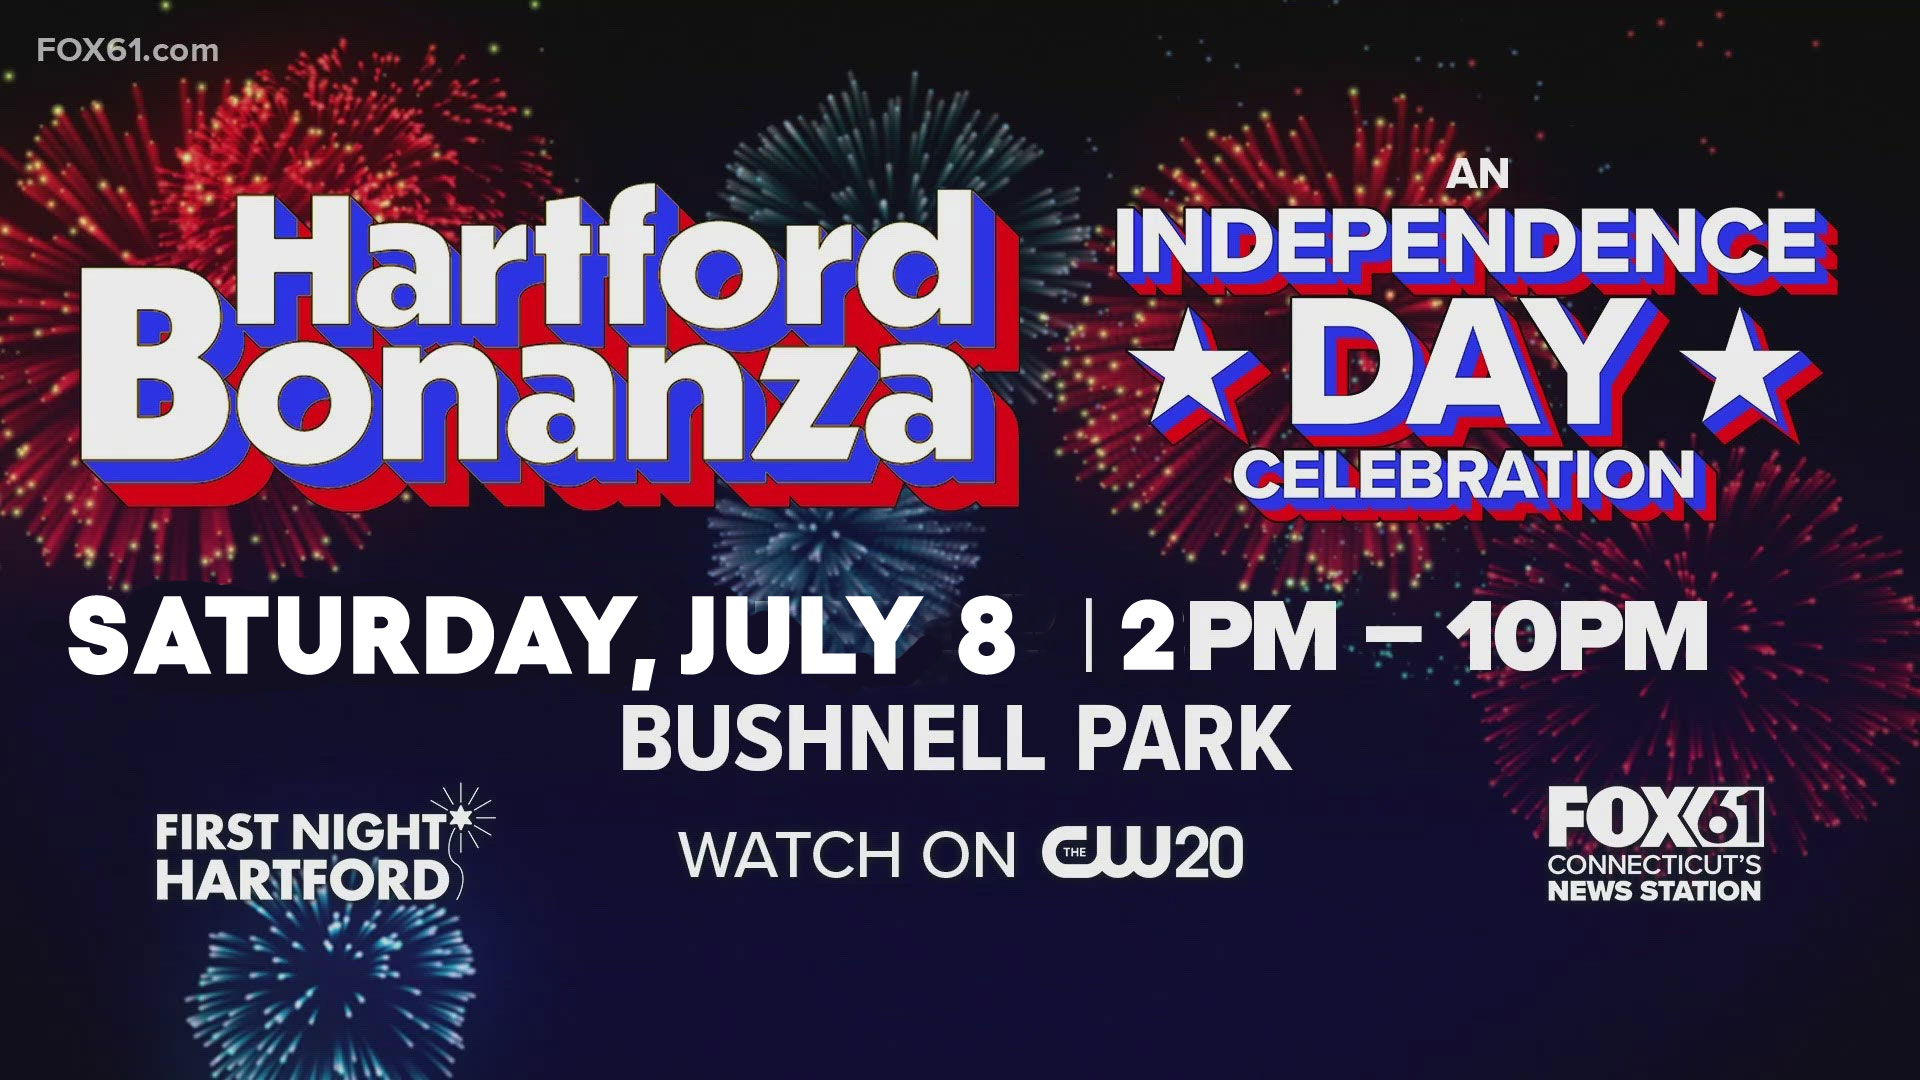 The Hartford Bonanza with Fireworks at Bushnell Parks has been rescheduled to Saturday, July 8th.